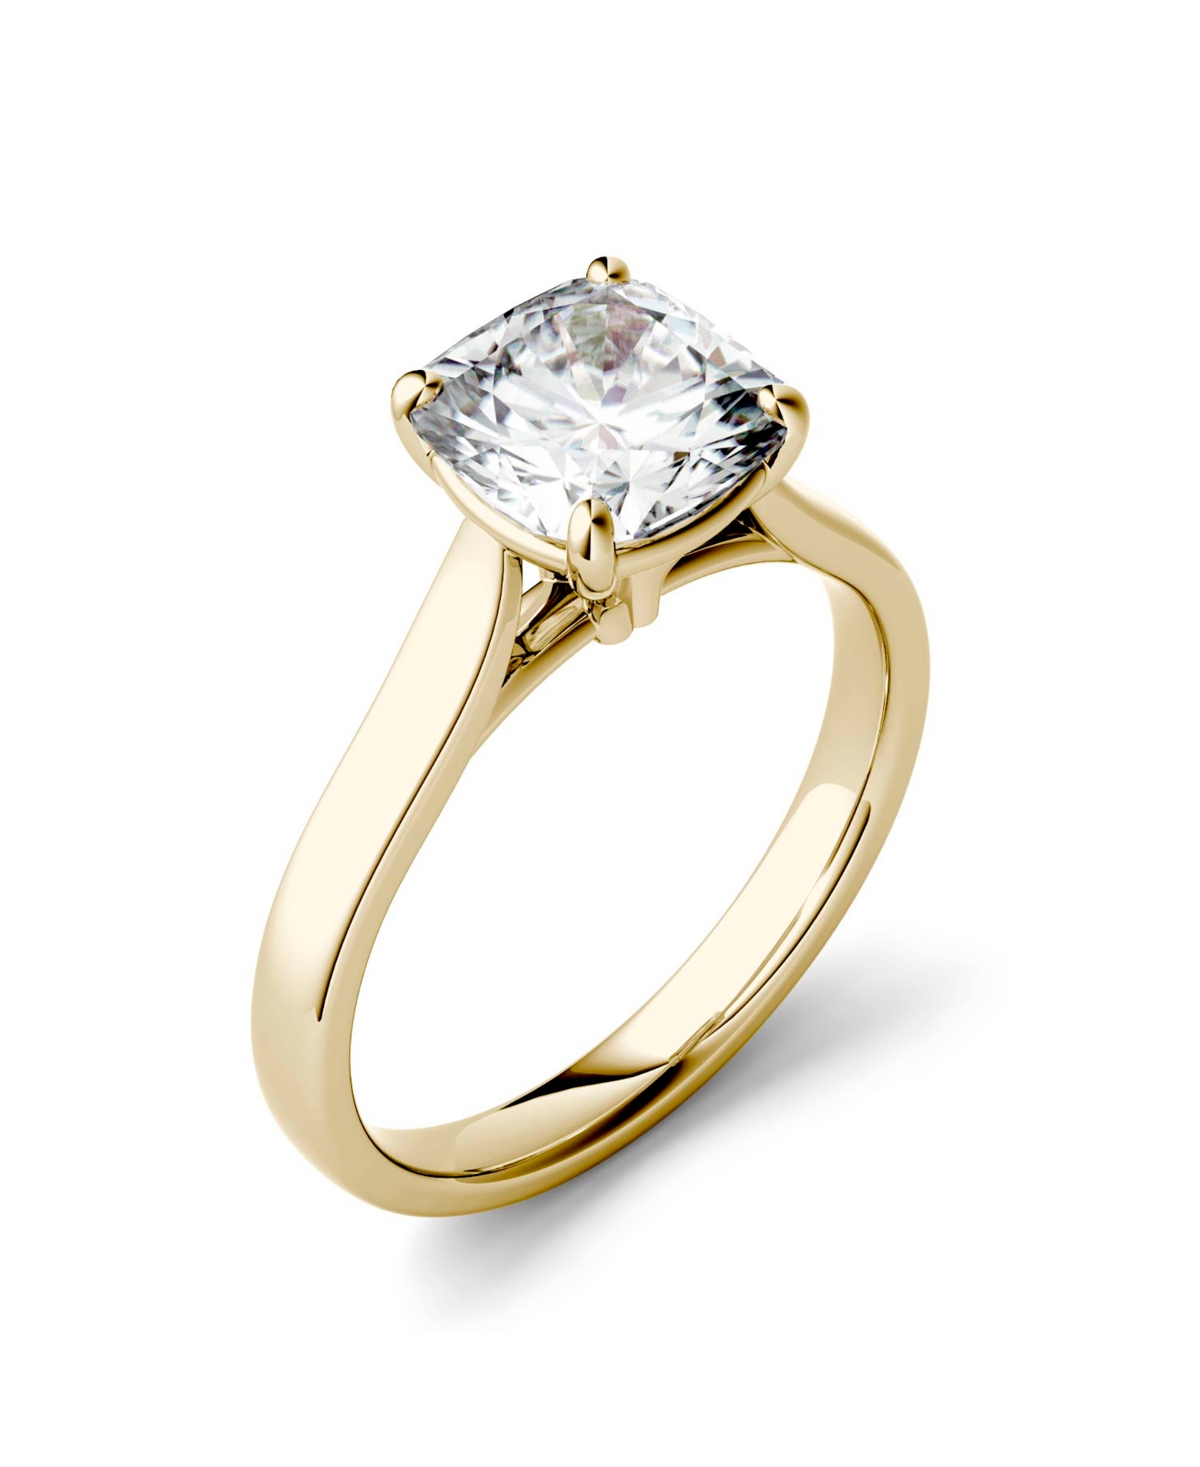 Moissanite Cushion Cut Solitaire Ring (2 ct. t.w. Diamond Equivalent) in 14k White or Yellow Gold - Gold